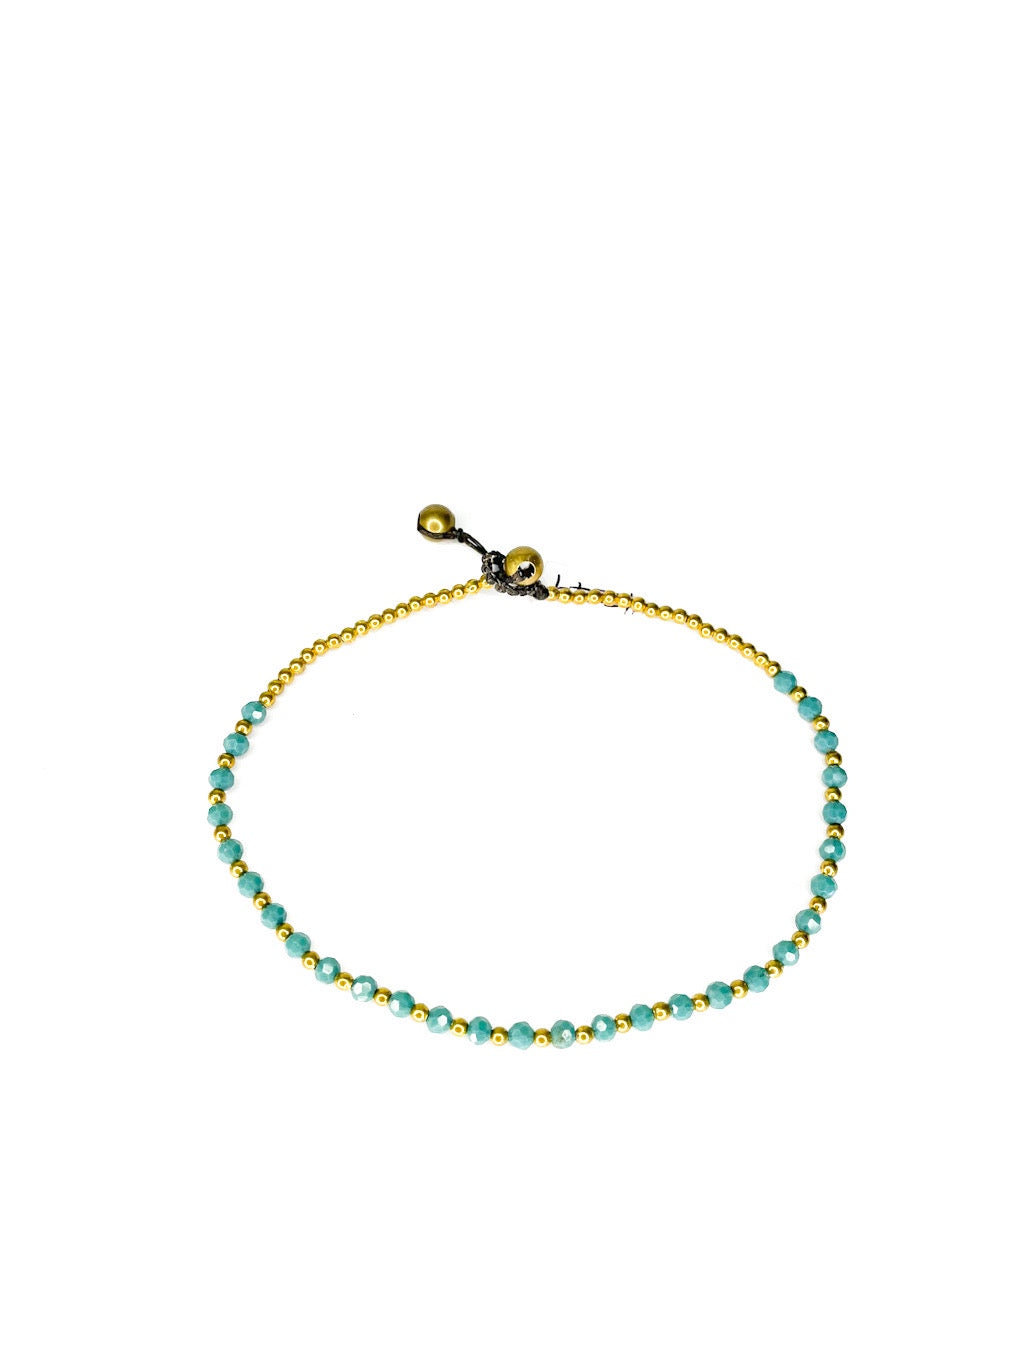 Faceted stone and brass beaded bracelet - various colours